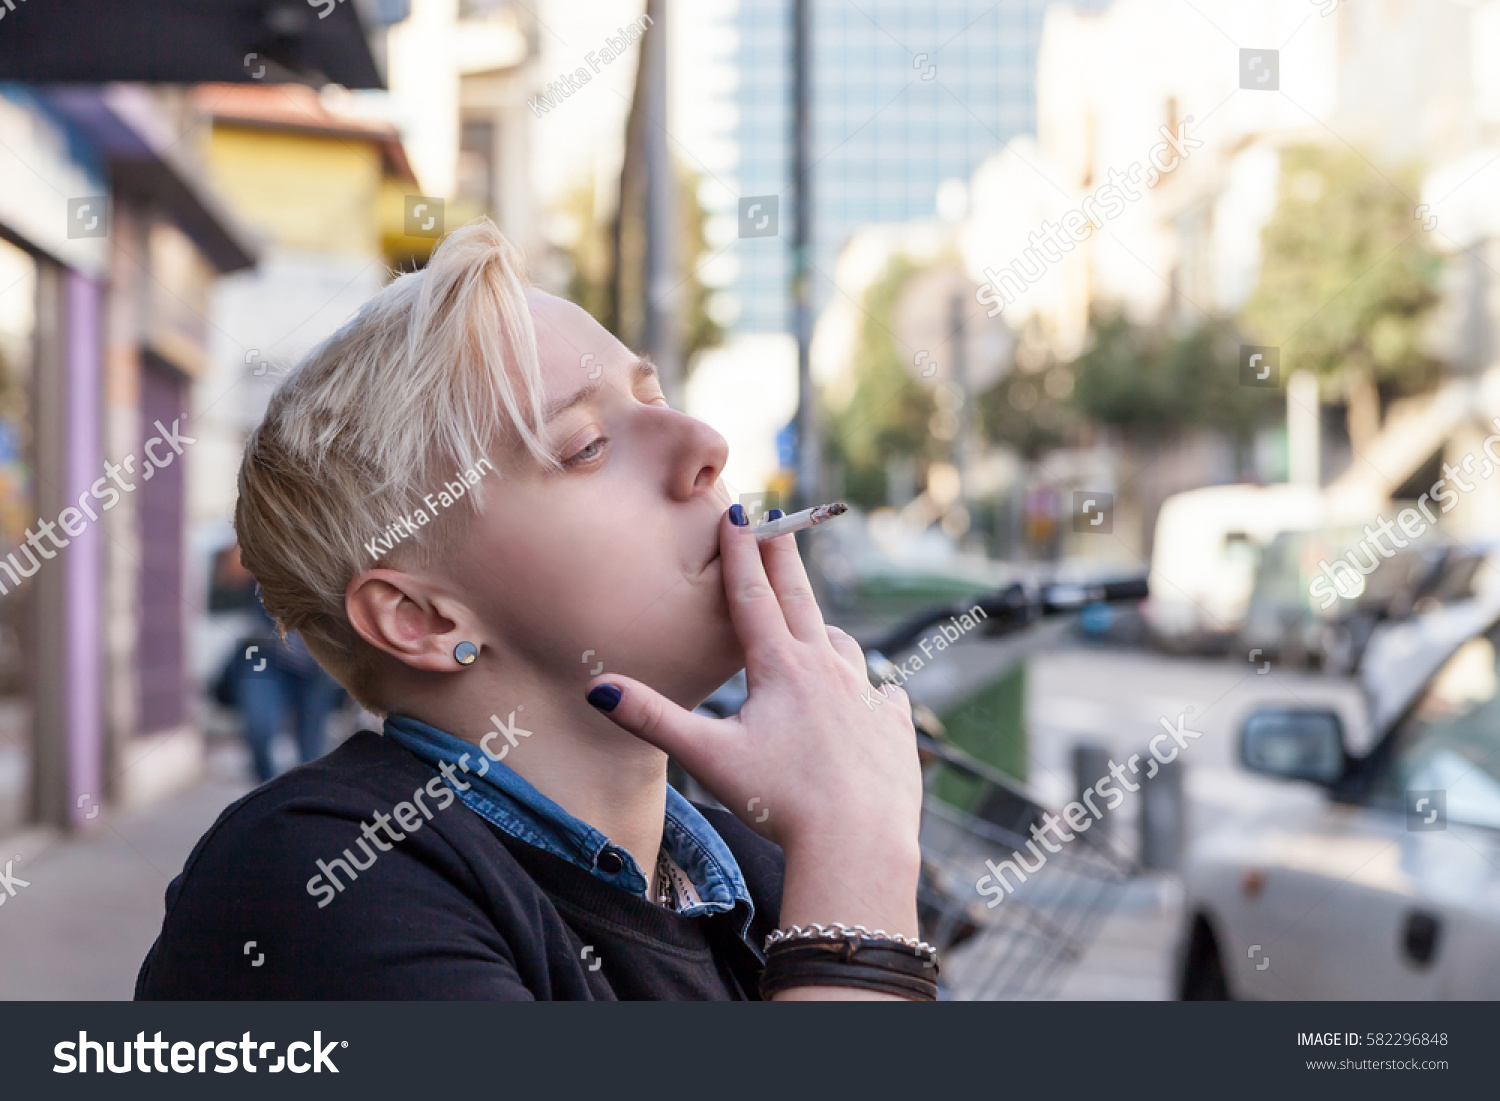 2. The allure of short hair and smoking for women - wide 3